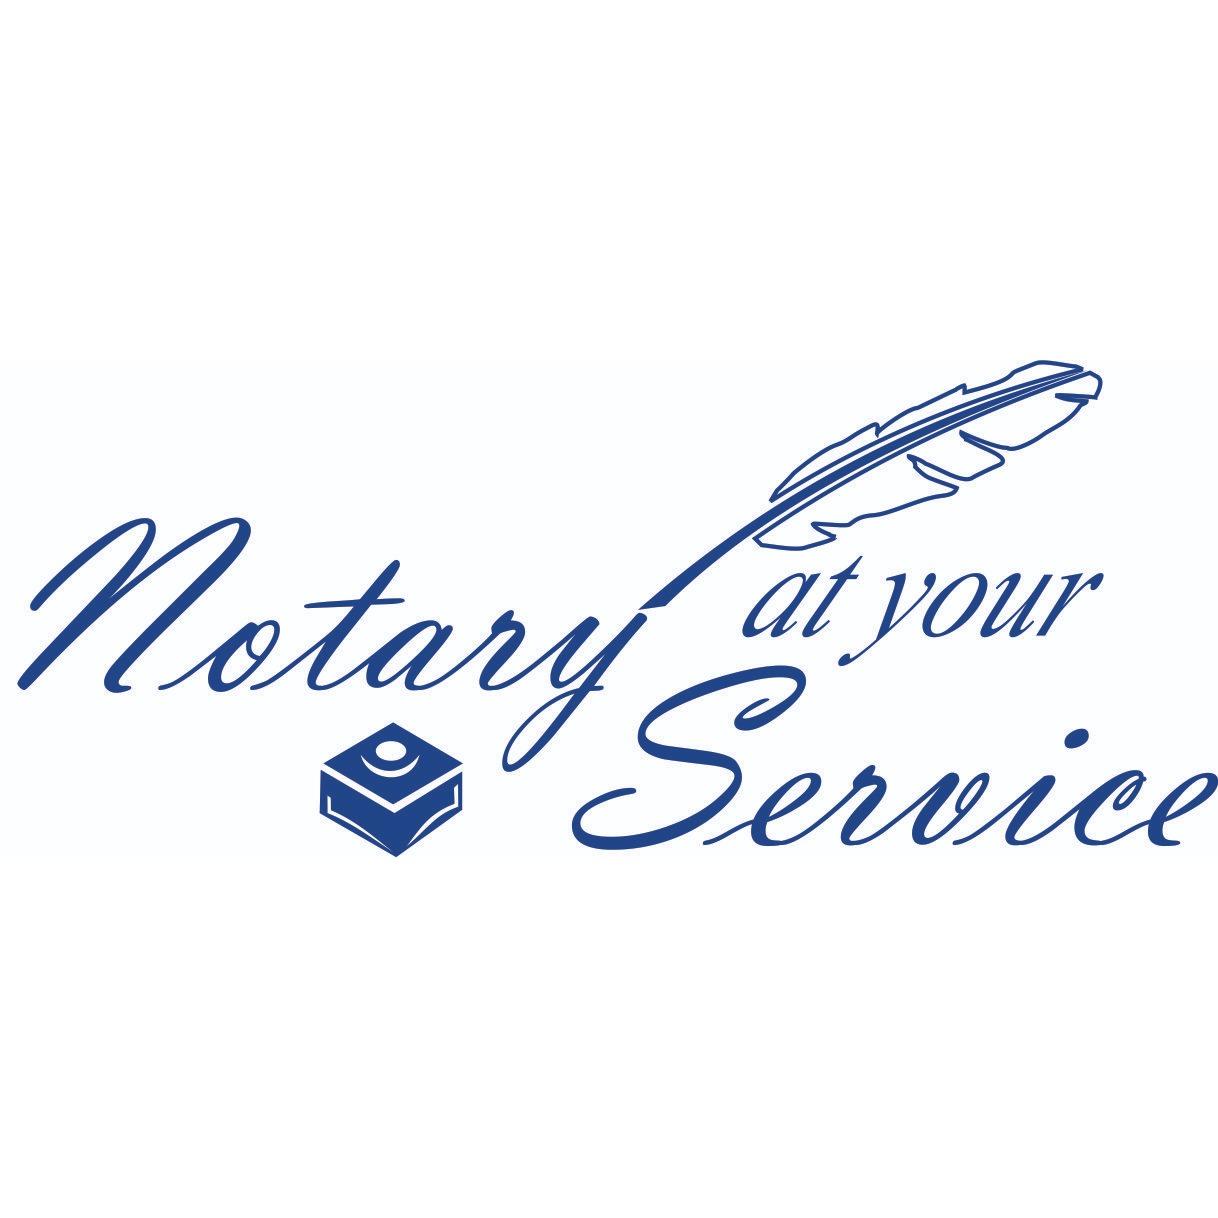 Notary At Your Service